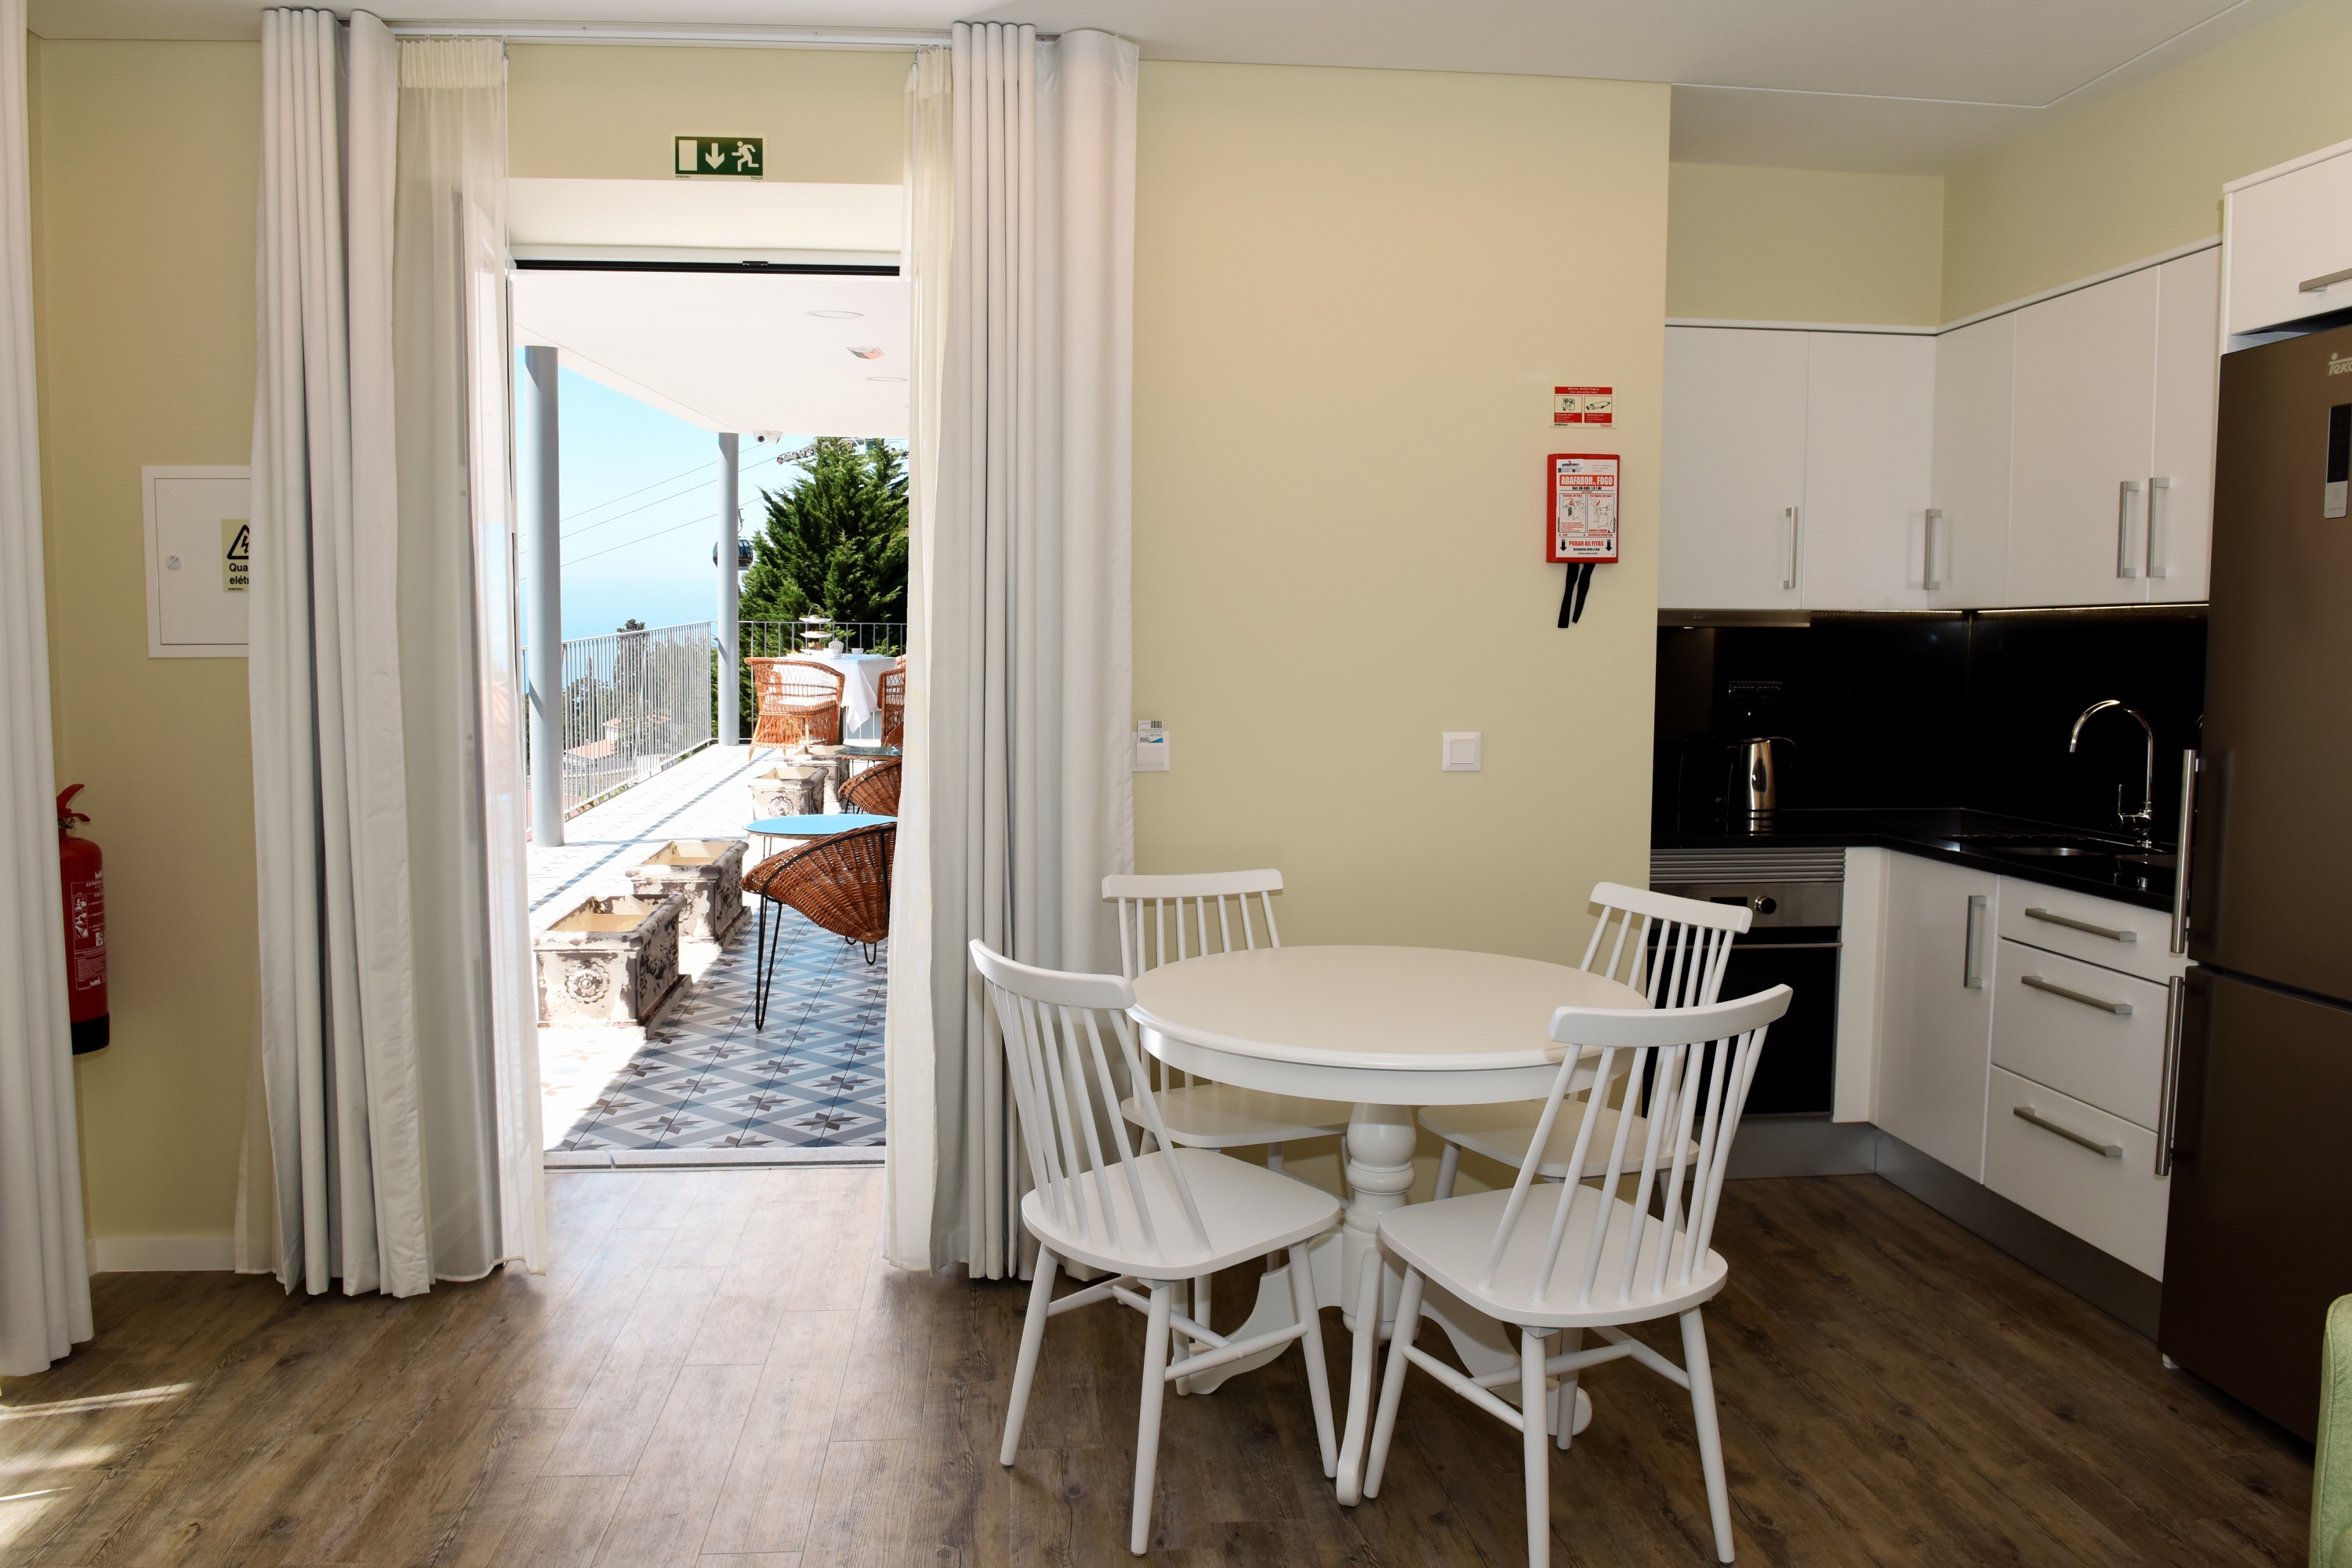 1-bed Superior Apartment in beautiful character Babosas Village Apartments - A1 2